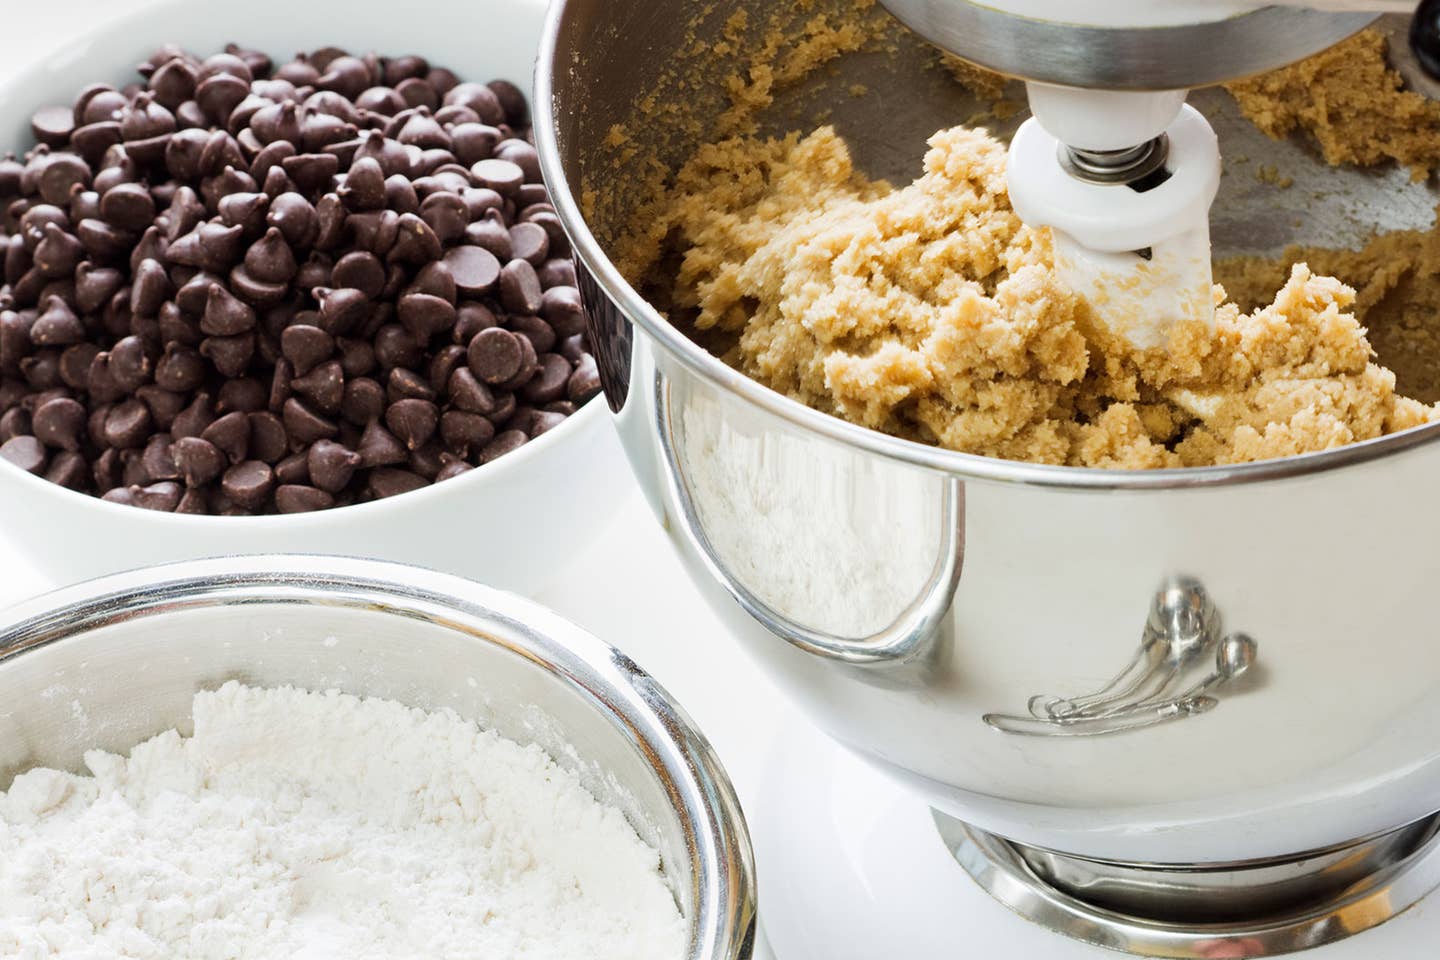 Whip up the Christmas cookies with KitchenAid's 5-Qt. Mixer at